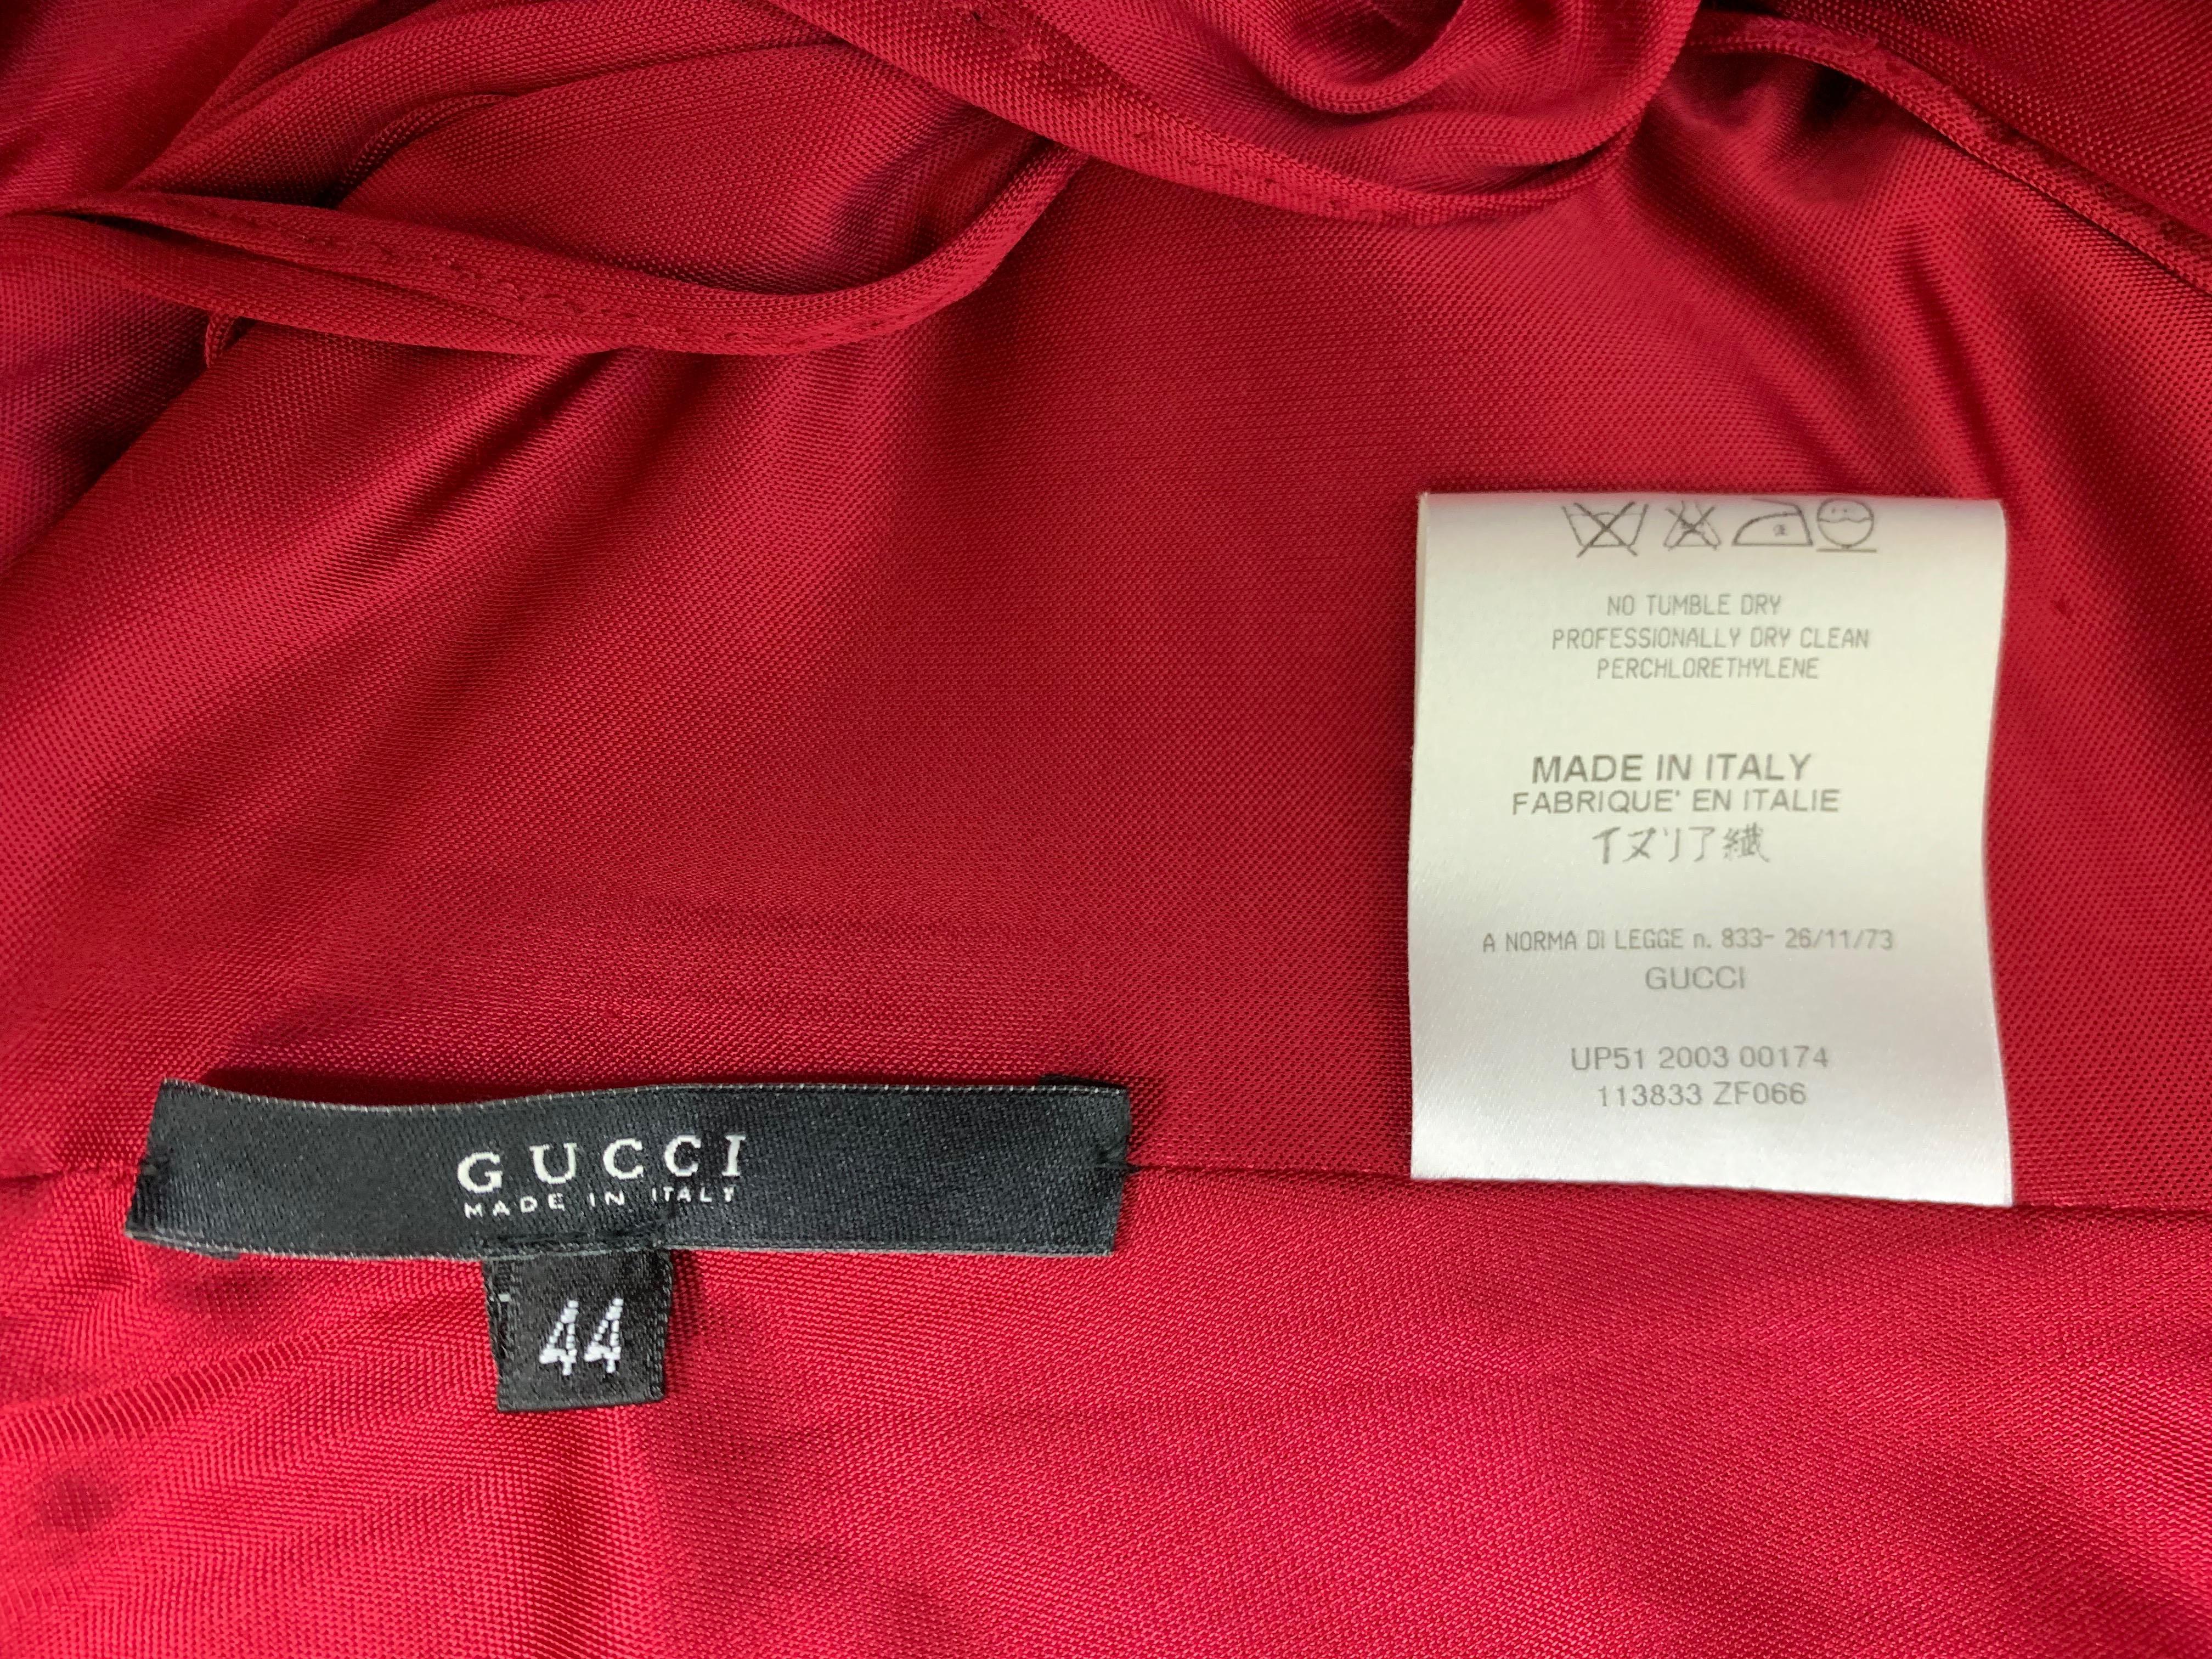 Women's F/W 2003 Gucci Tom Ford Plunging Strappy Bondage Red Slinky Gown Dress